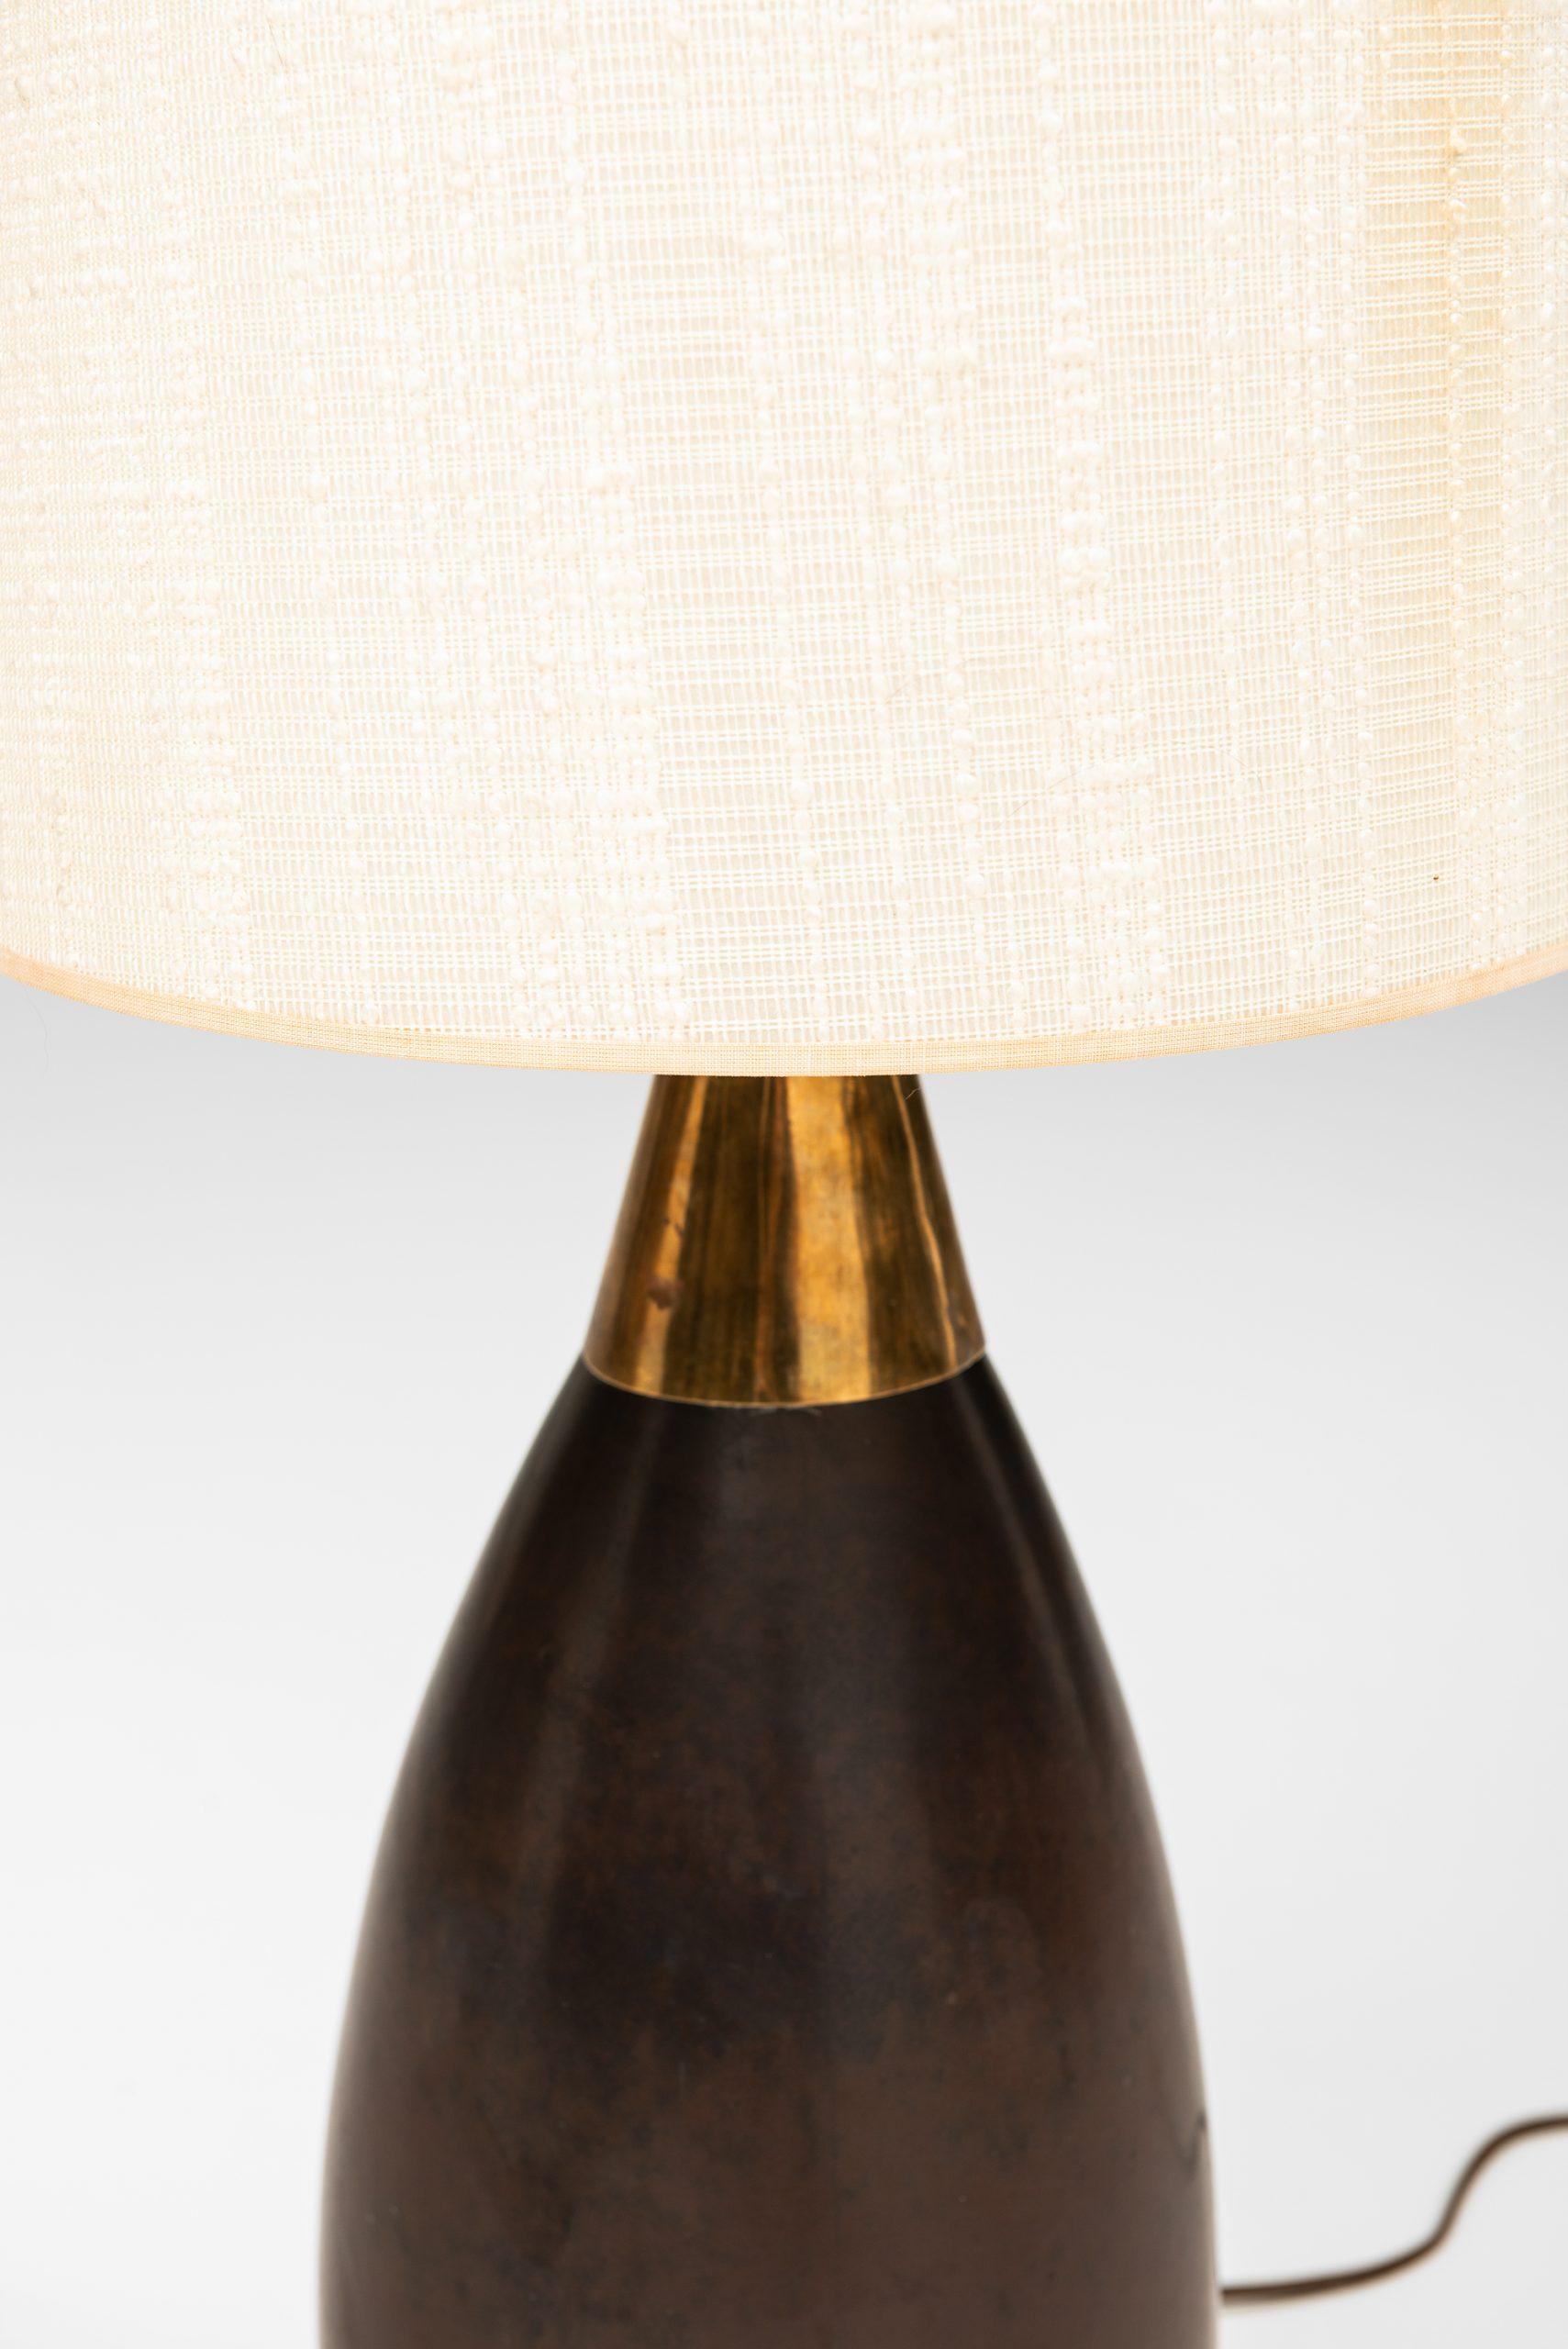 Ceramic table lamp designed by Carl-Harry Stålhane. Produced by Rörstrand in Sweden.